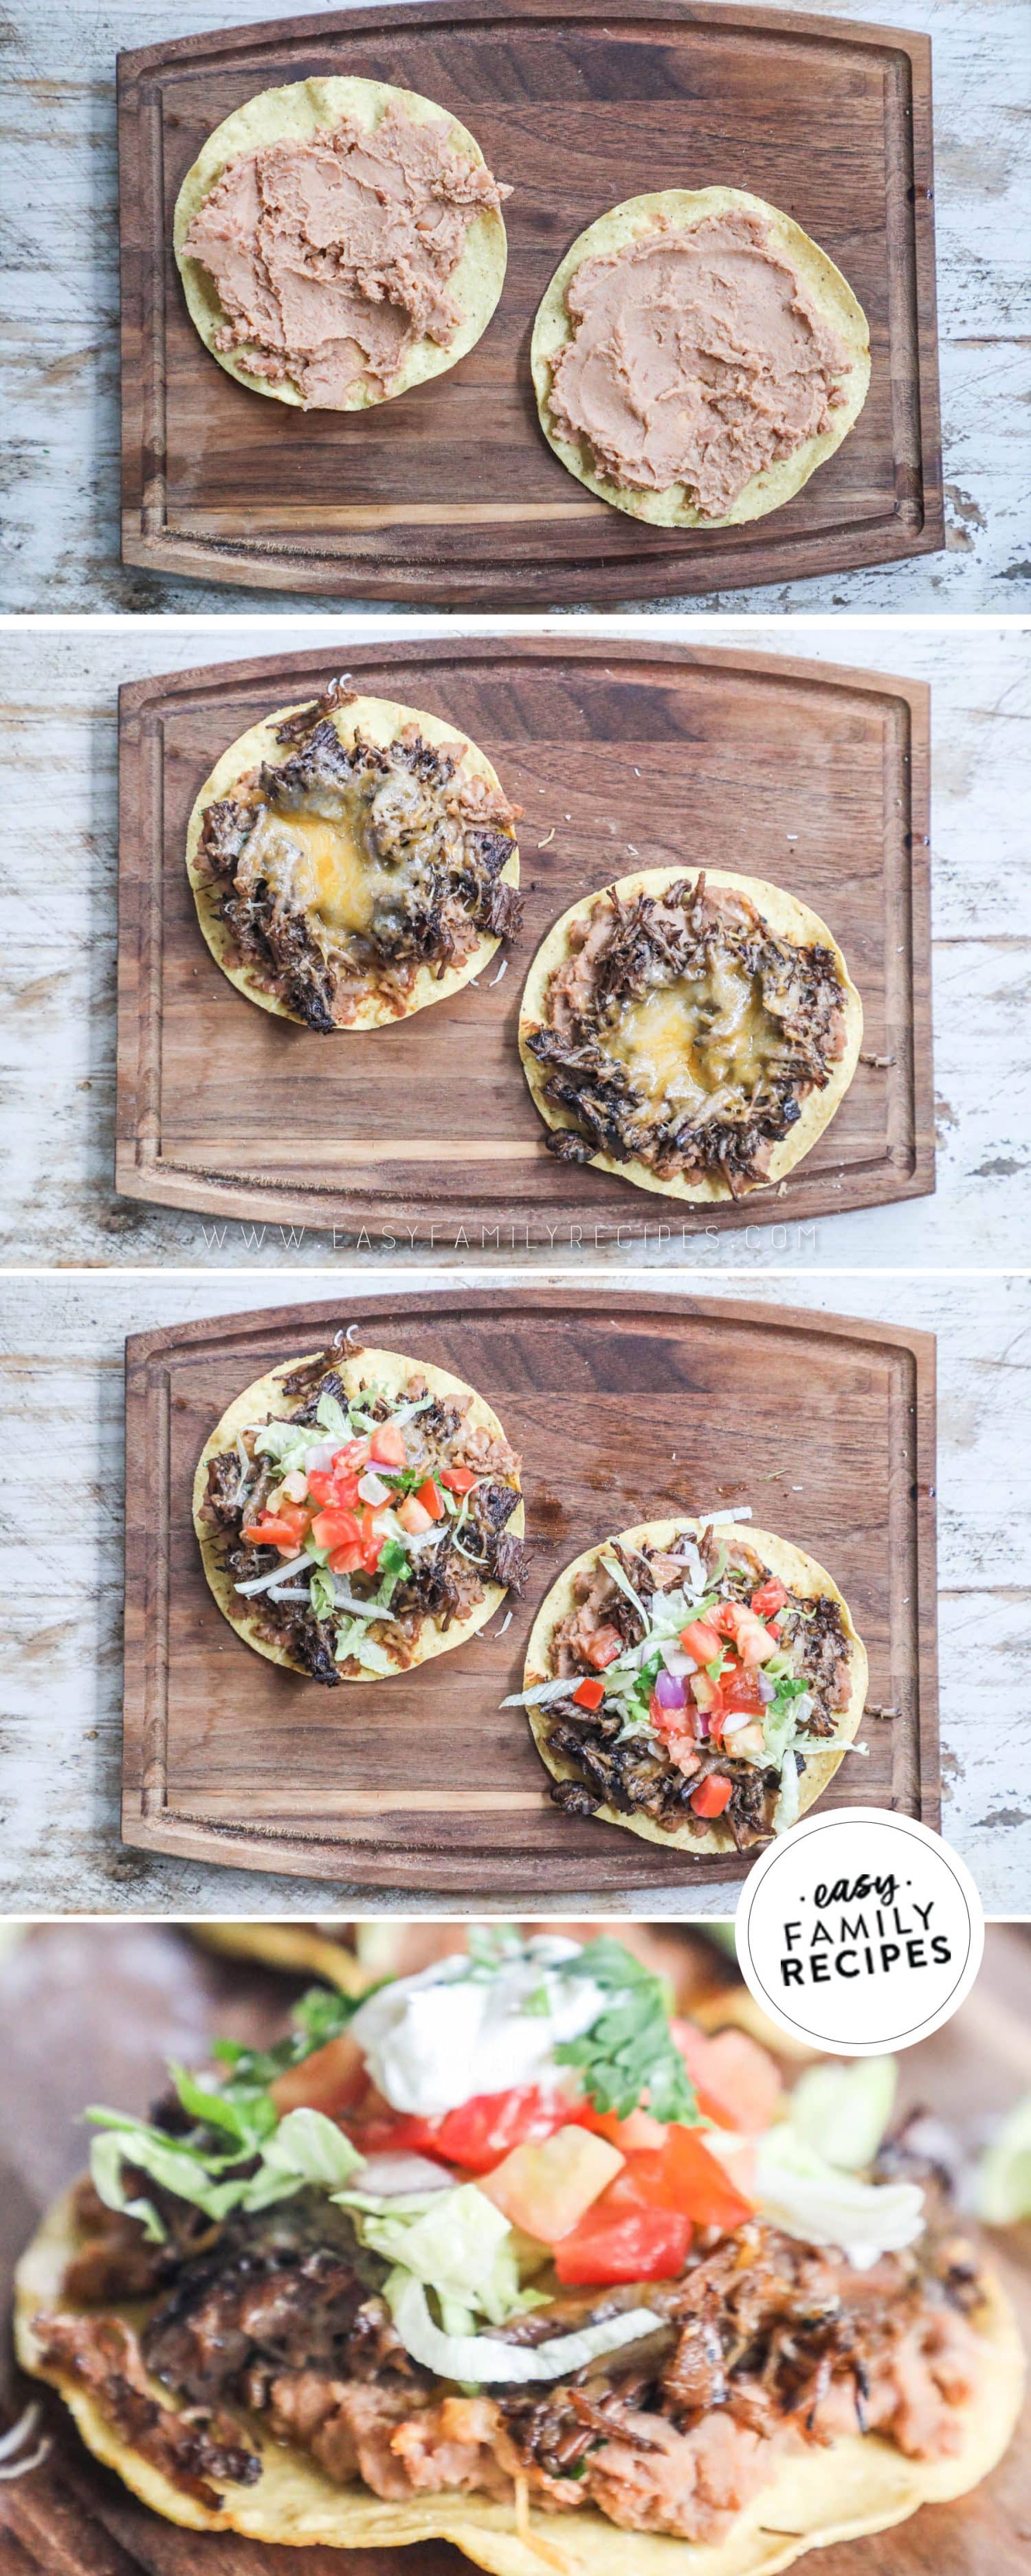 how to make barbacoa tostadas 1)spread refried on a tostada shell 2)add beef and cheese 3)bake and add toppings 4)serve.